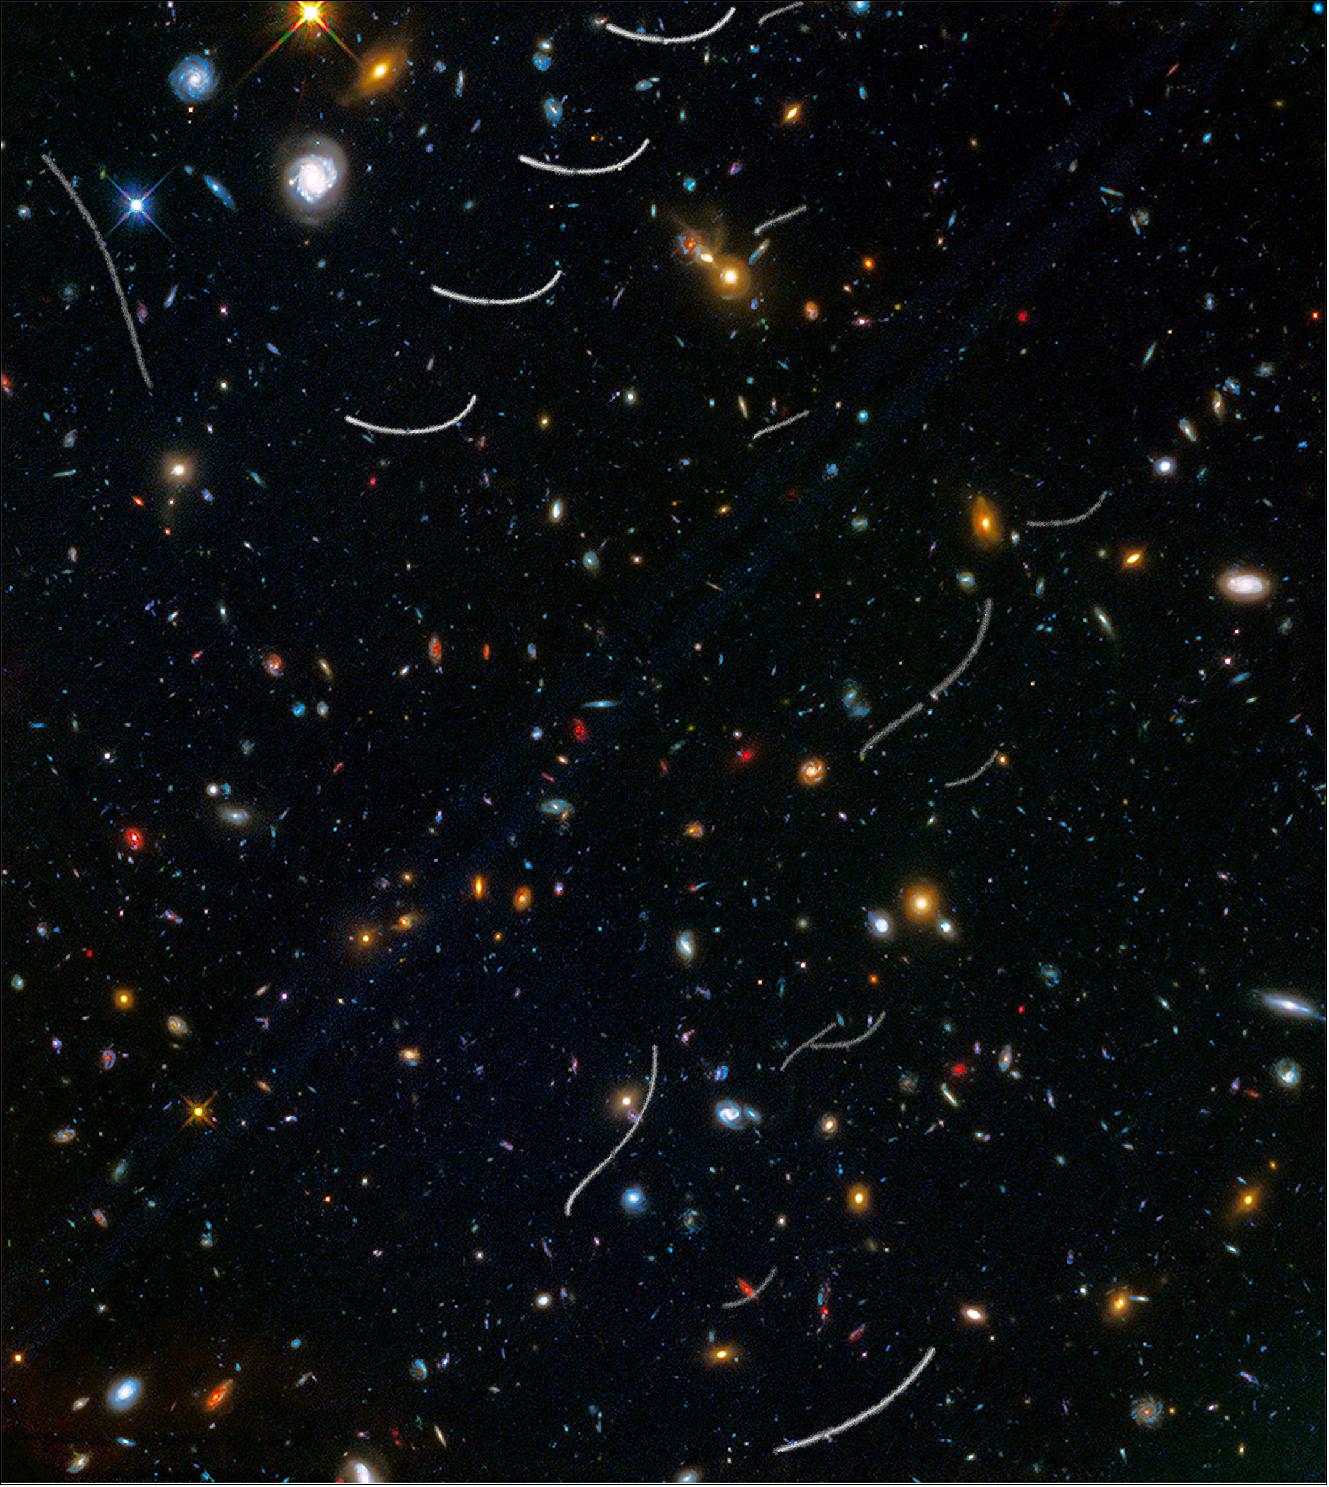 Figure 42: This image was taken as part of the Frontier Fields program, a Hubble initiative to push the telescope’s limits, observing six massive galaxy clusters – huge cosmic objects comprising hundreds of galaxies along with hot gas and dark matter – and exploiting their effect as a gravitational ‘lens’ on background sources to capture light from extremely distant galaxies (image credit: NASA, ESA, and B. Sunnquist and J. Mack (STScI); CC BY 4.0; Acknowledgment: NASA, ESA, and J. Lotz (STScI) and the HFF Team)